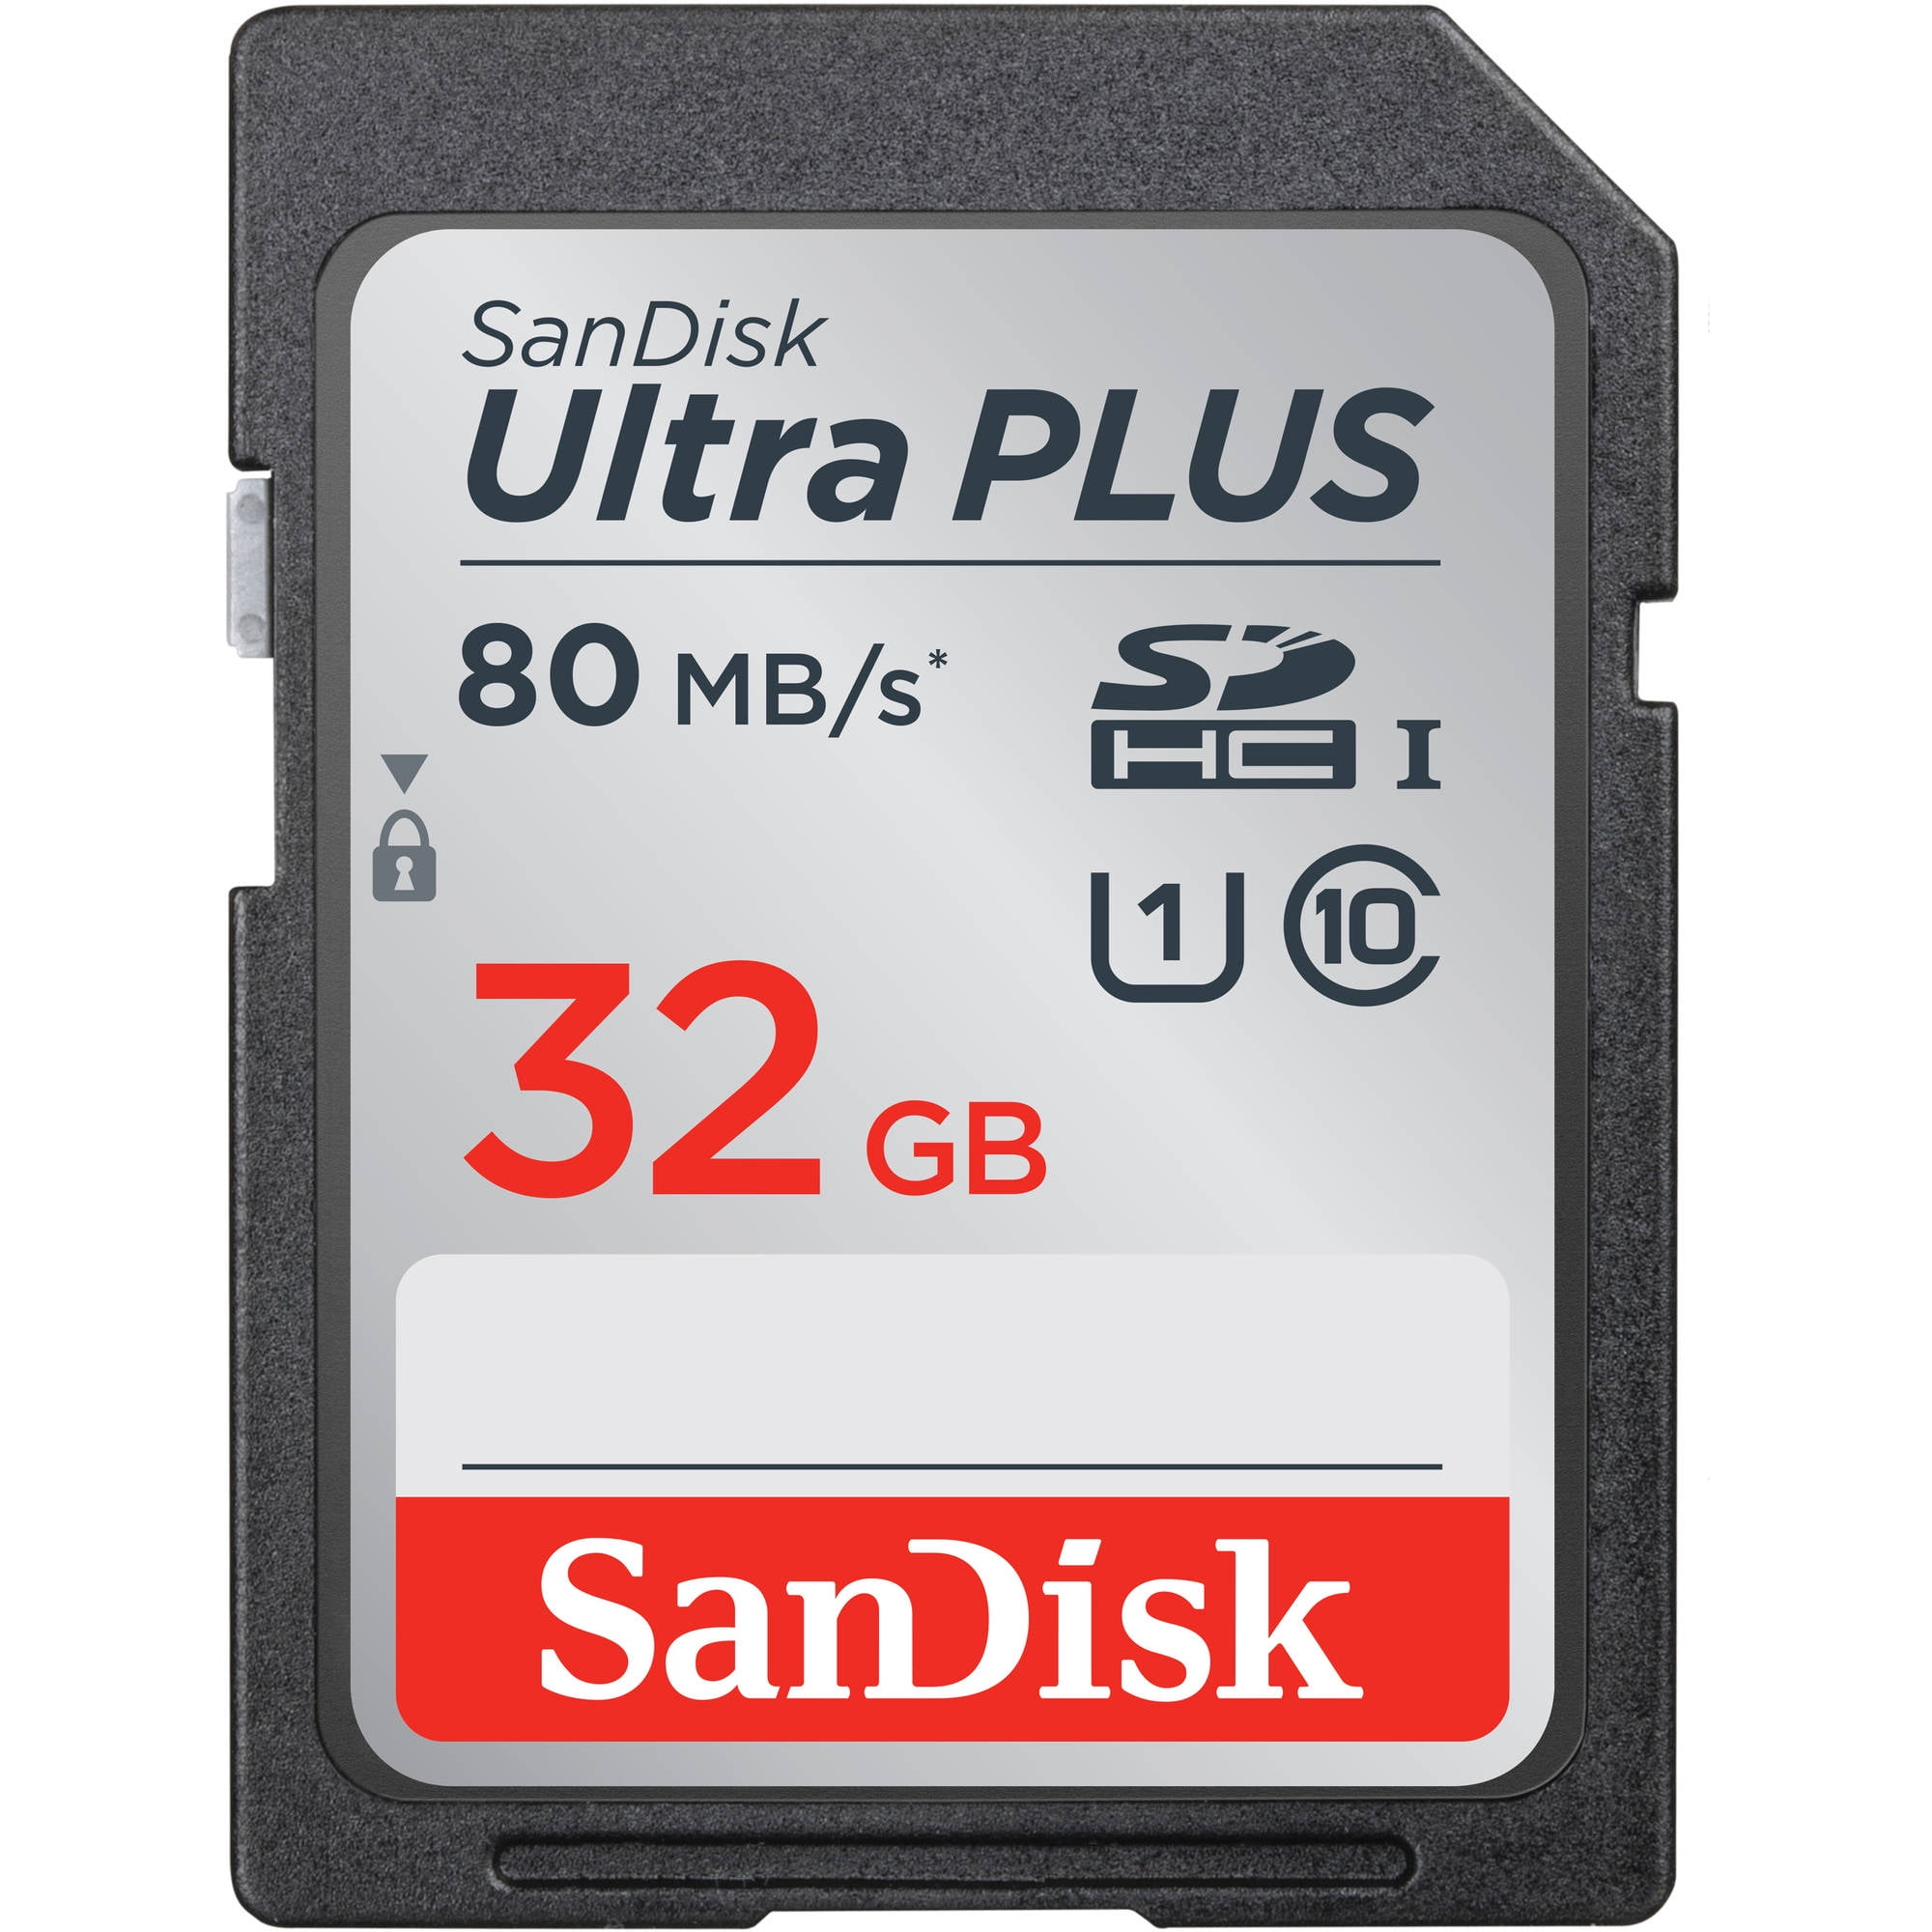 SanDisk 32 GB Ultra Plus Class 10 UHS-1 SDHC Memory Card